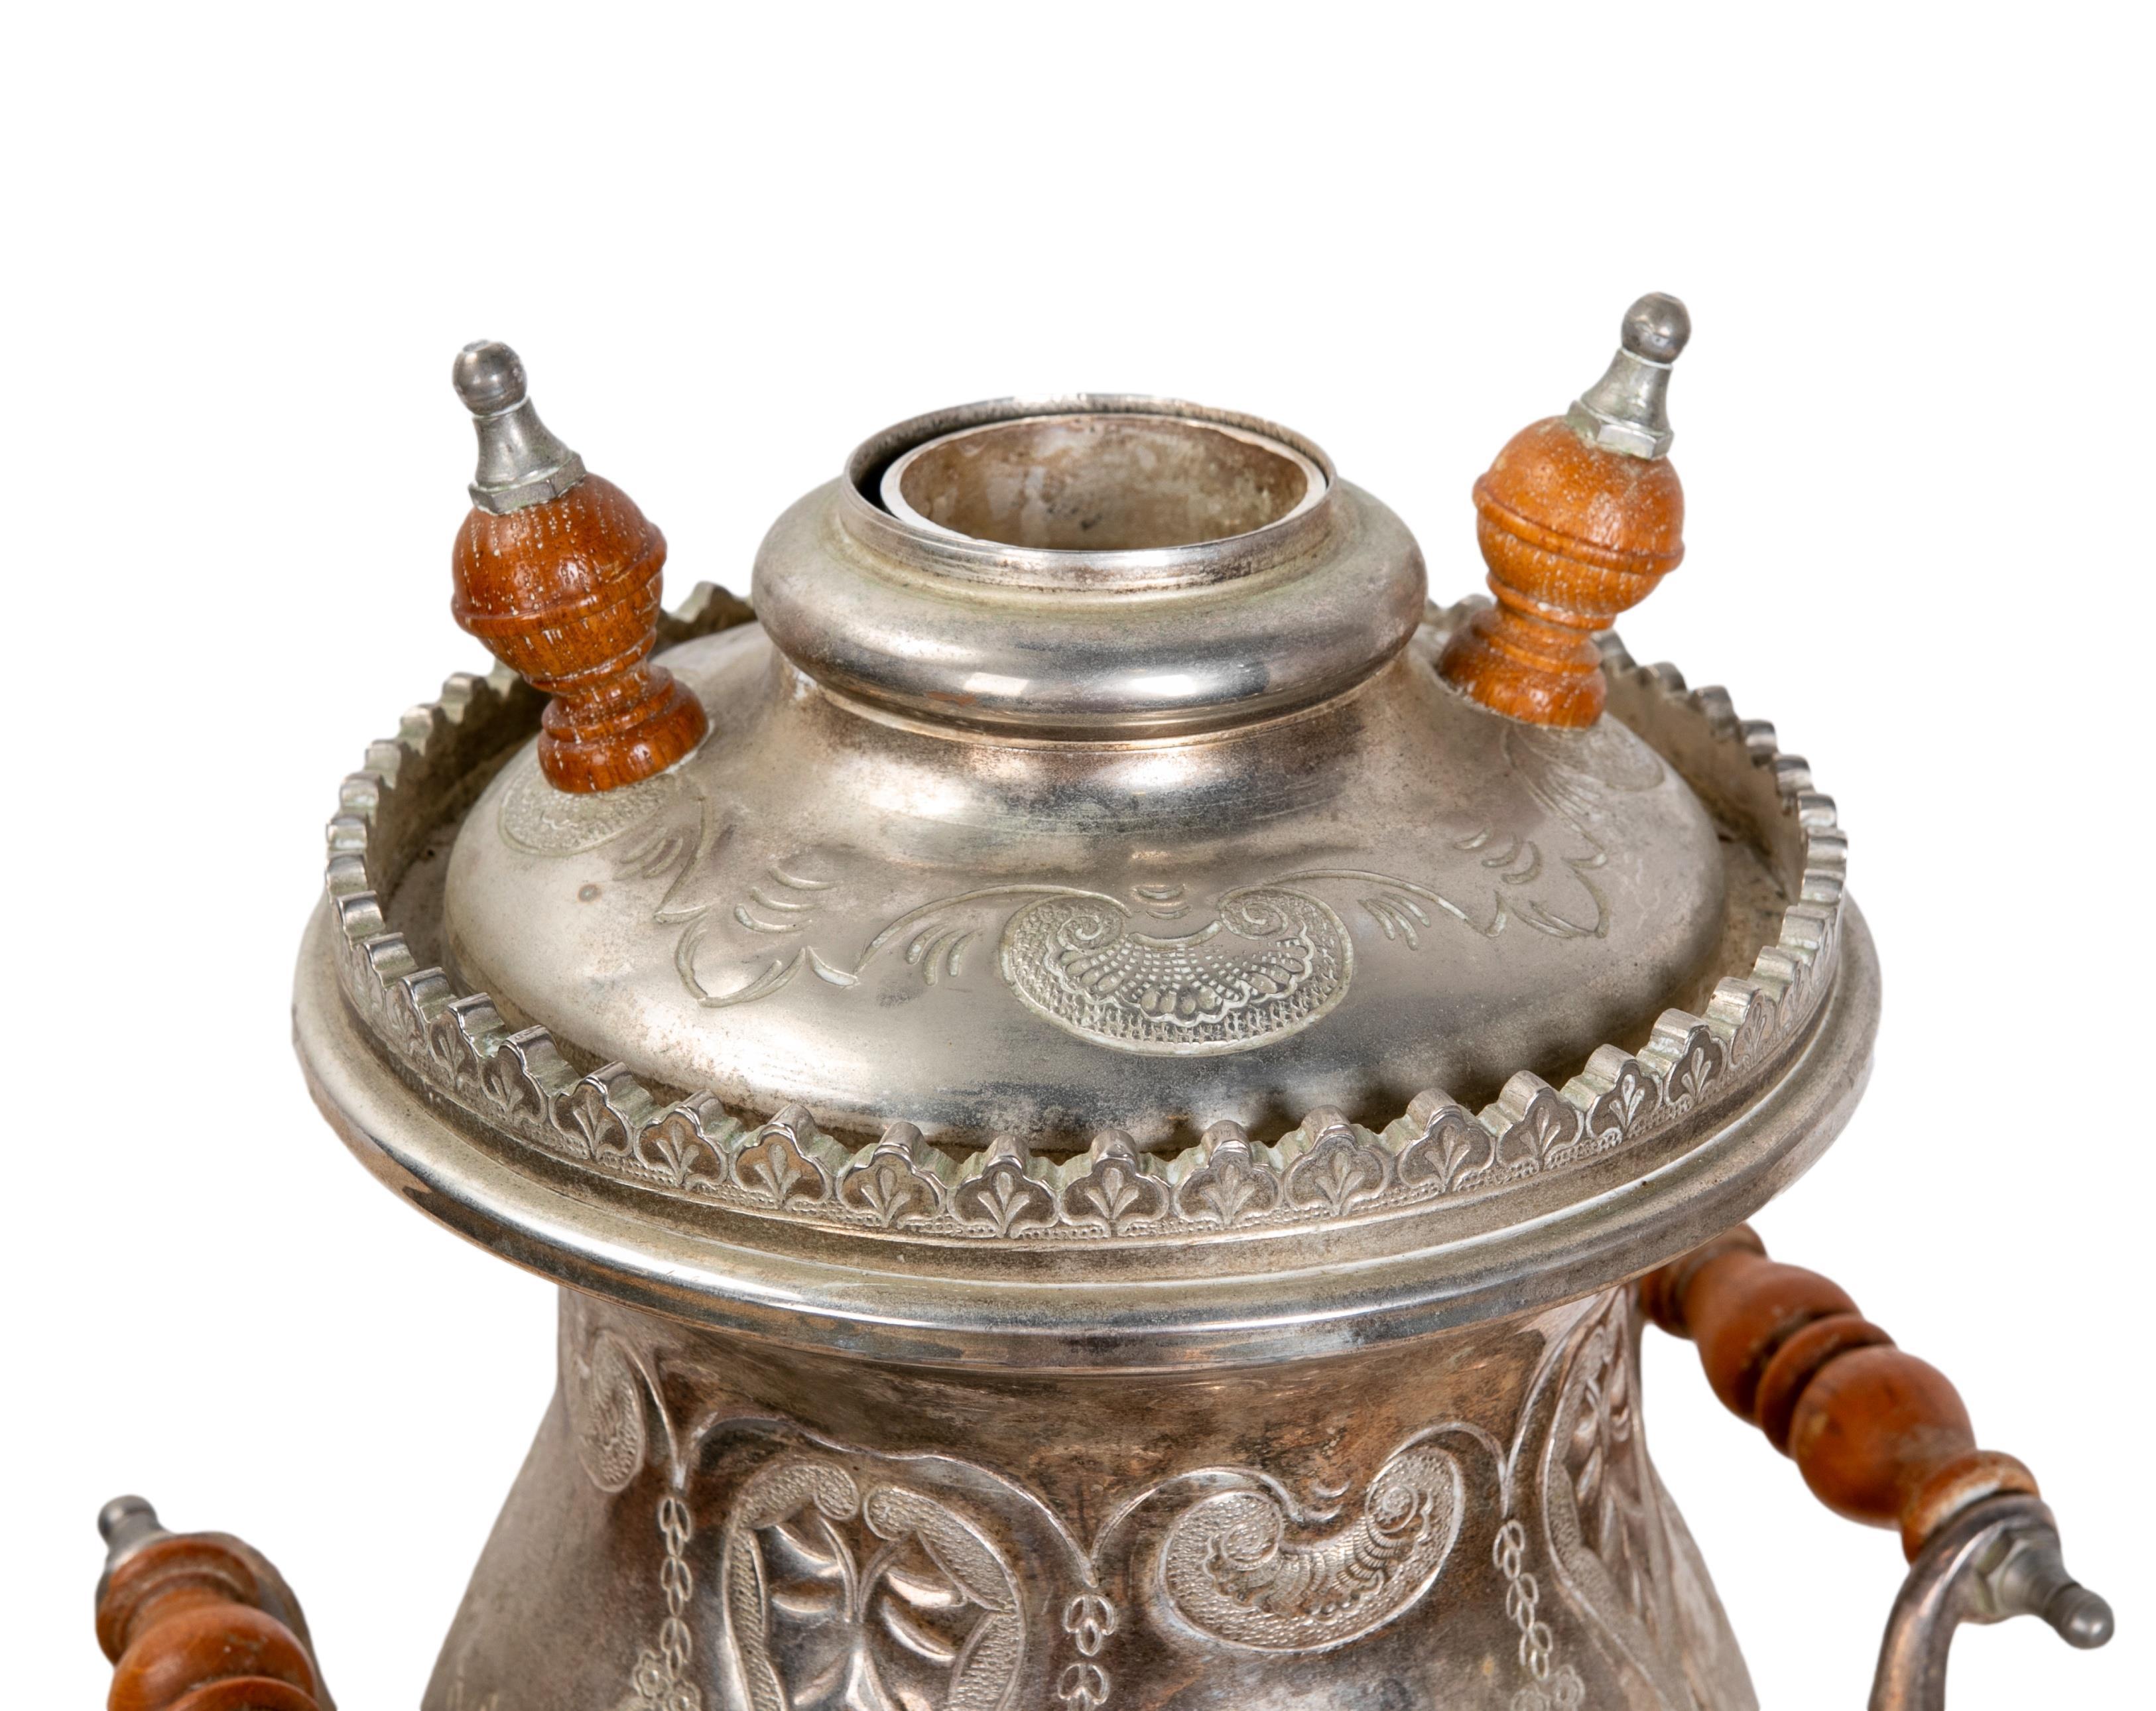 1980s Moroccan Silver-Plated Metal Samovar with Wooden Handles 12